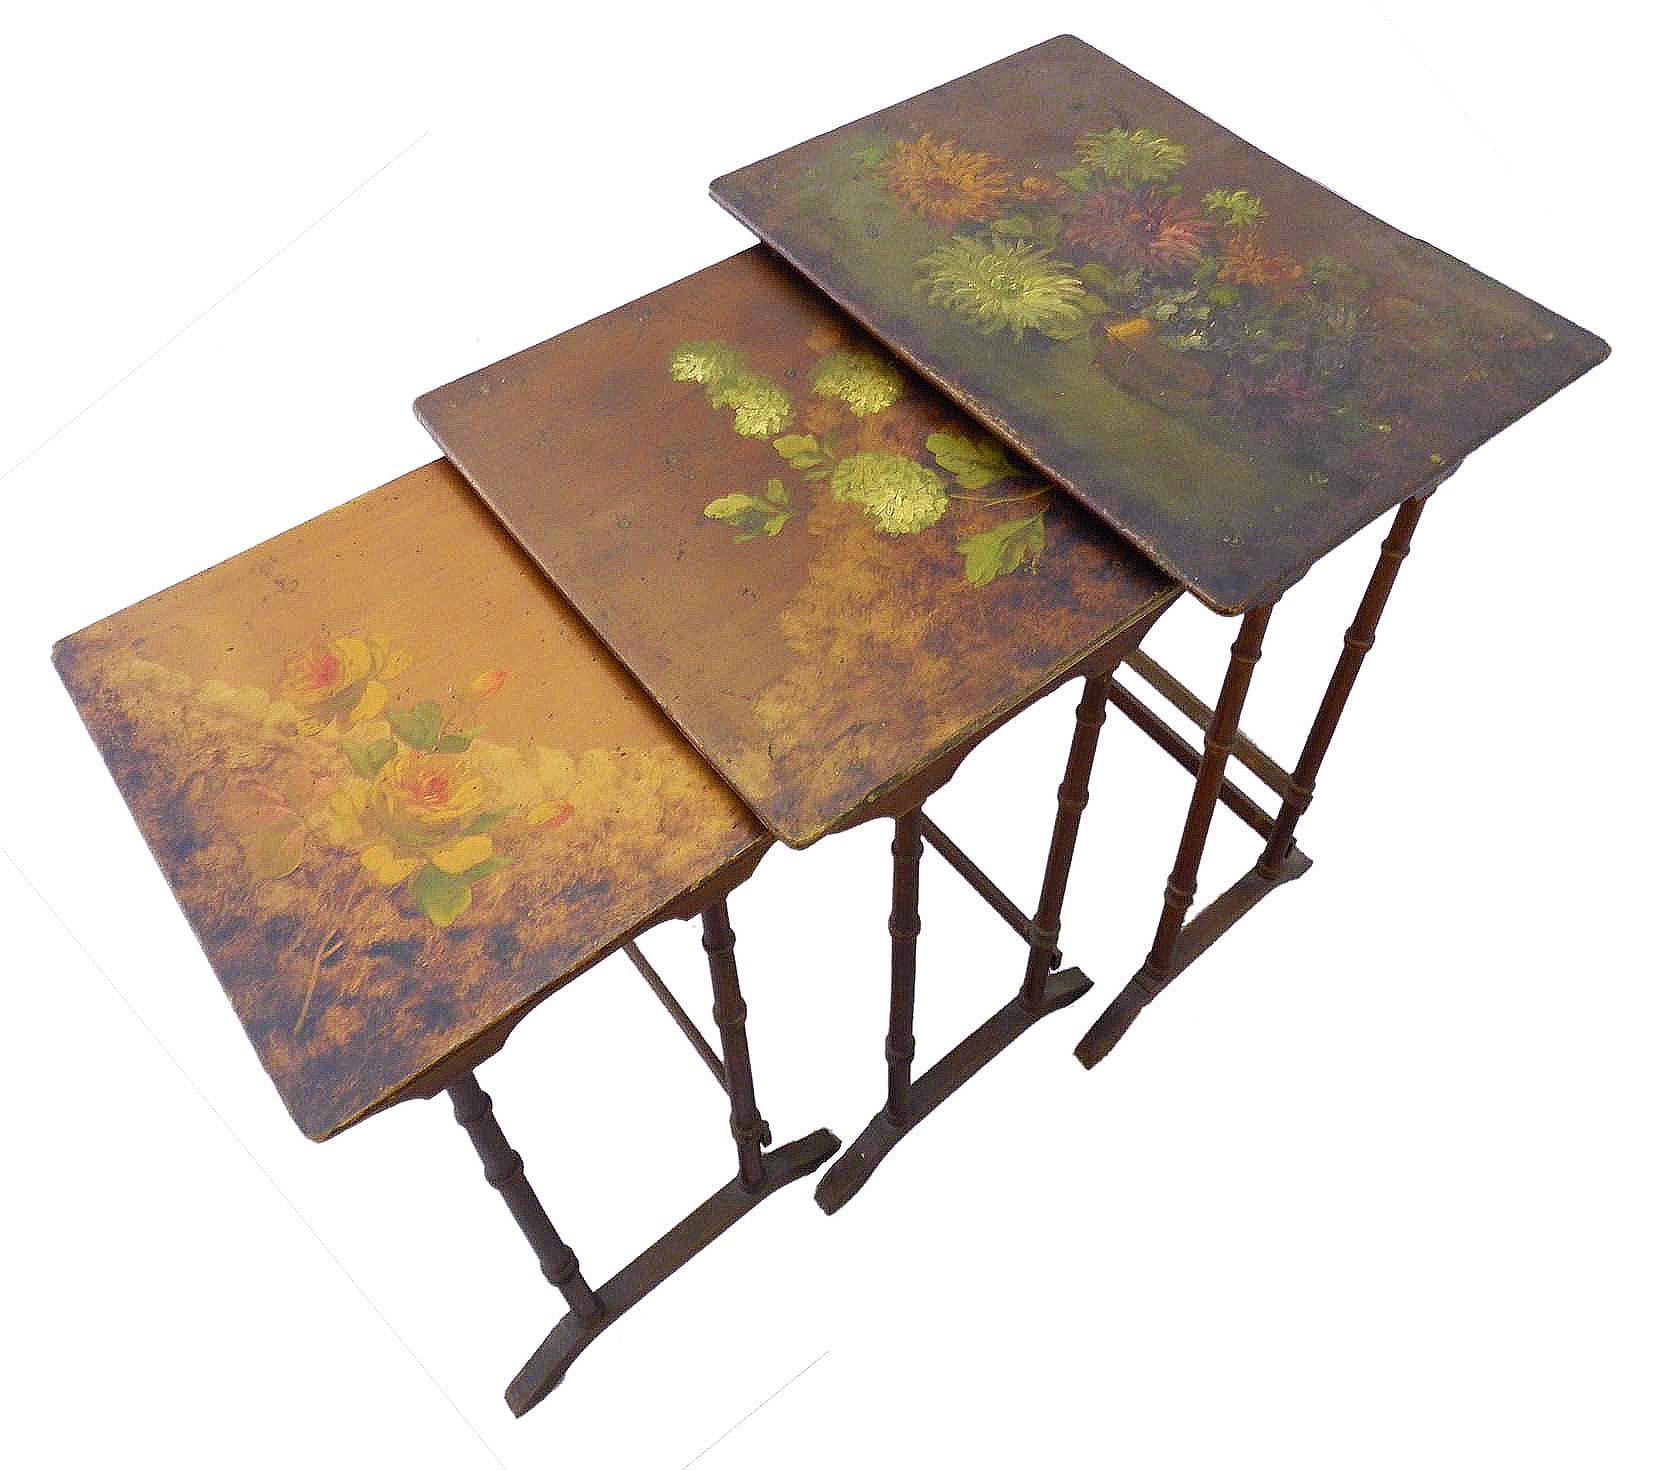 French Provincial Nesting Tables French Original Painted One of a Kind Floral Tops 19th Century